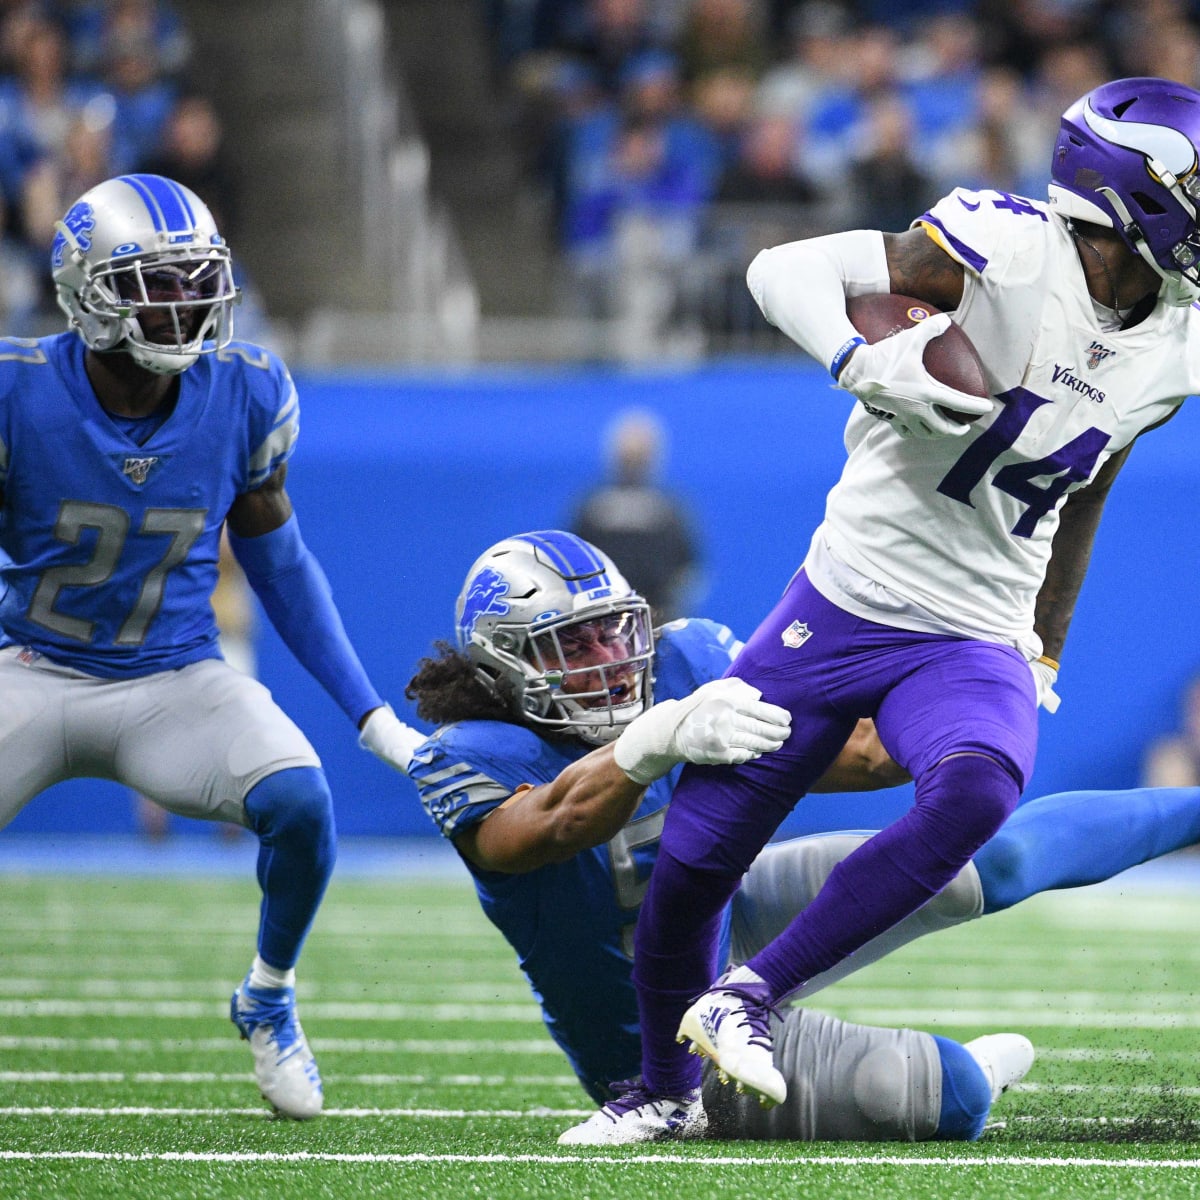 How to Watch Vikings vs. Lions: Preview, TV Channel, Streaming